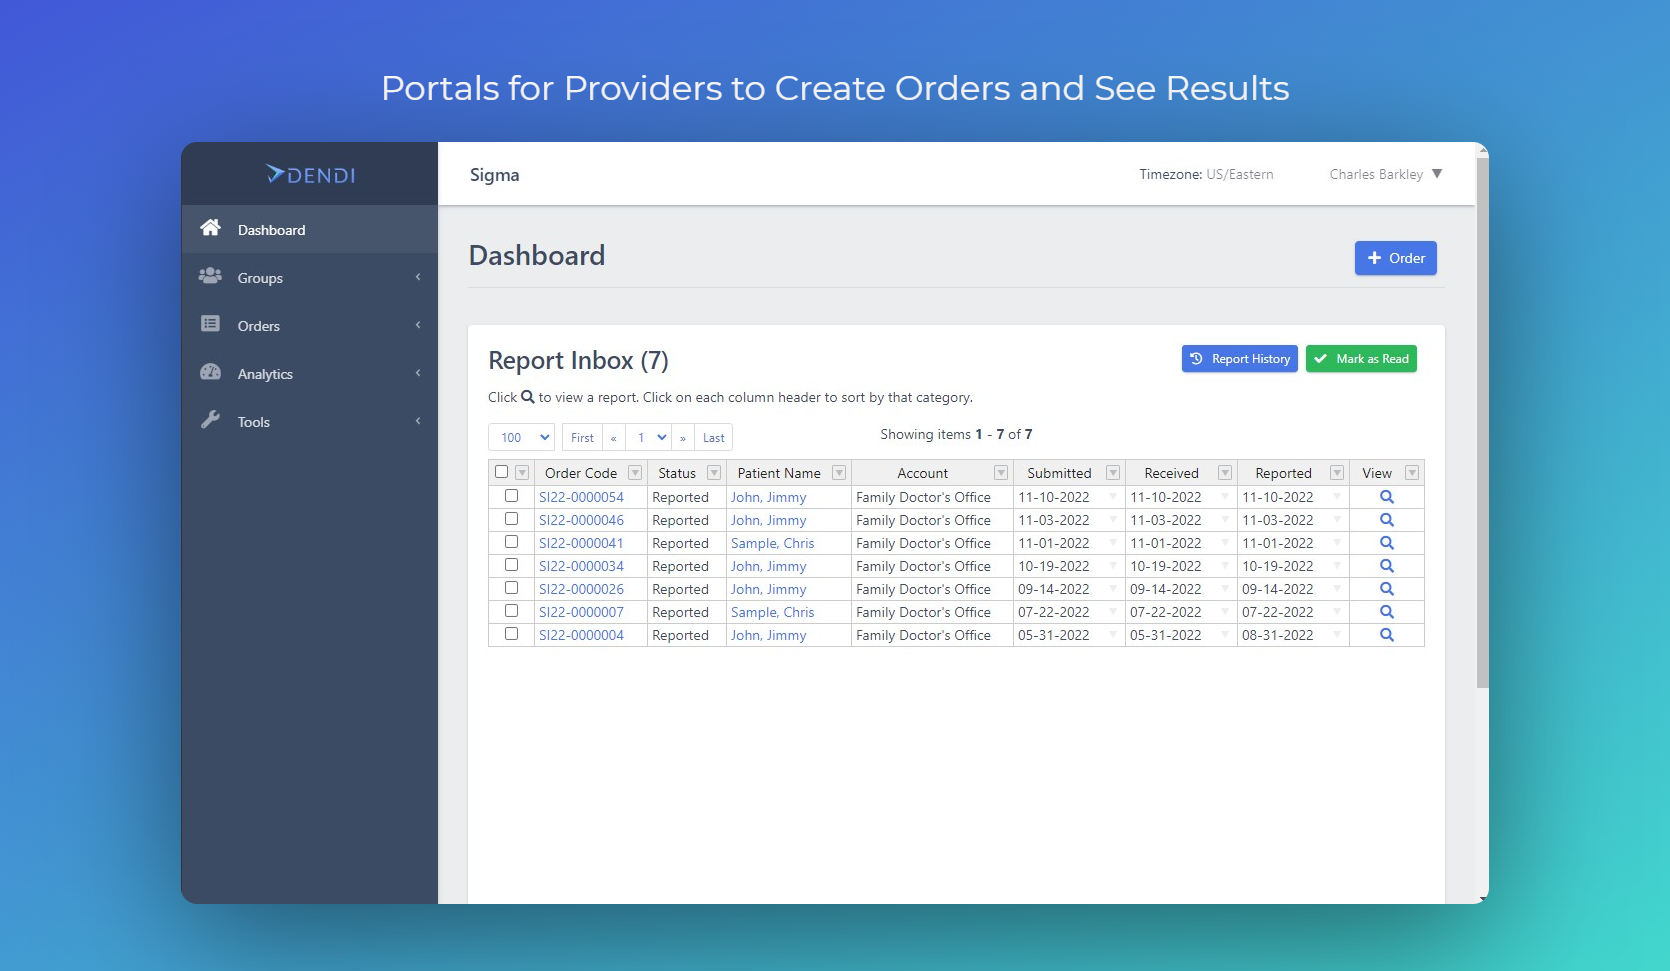 Portals for providers to quickly create orders and see results.